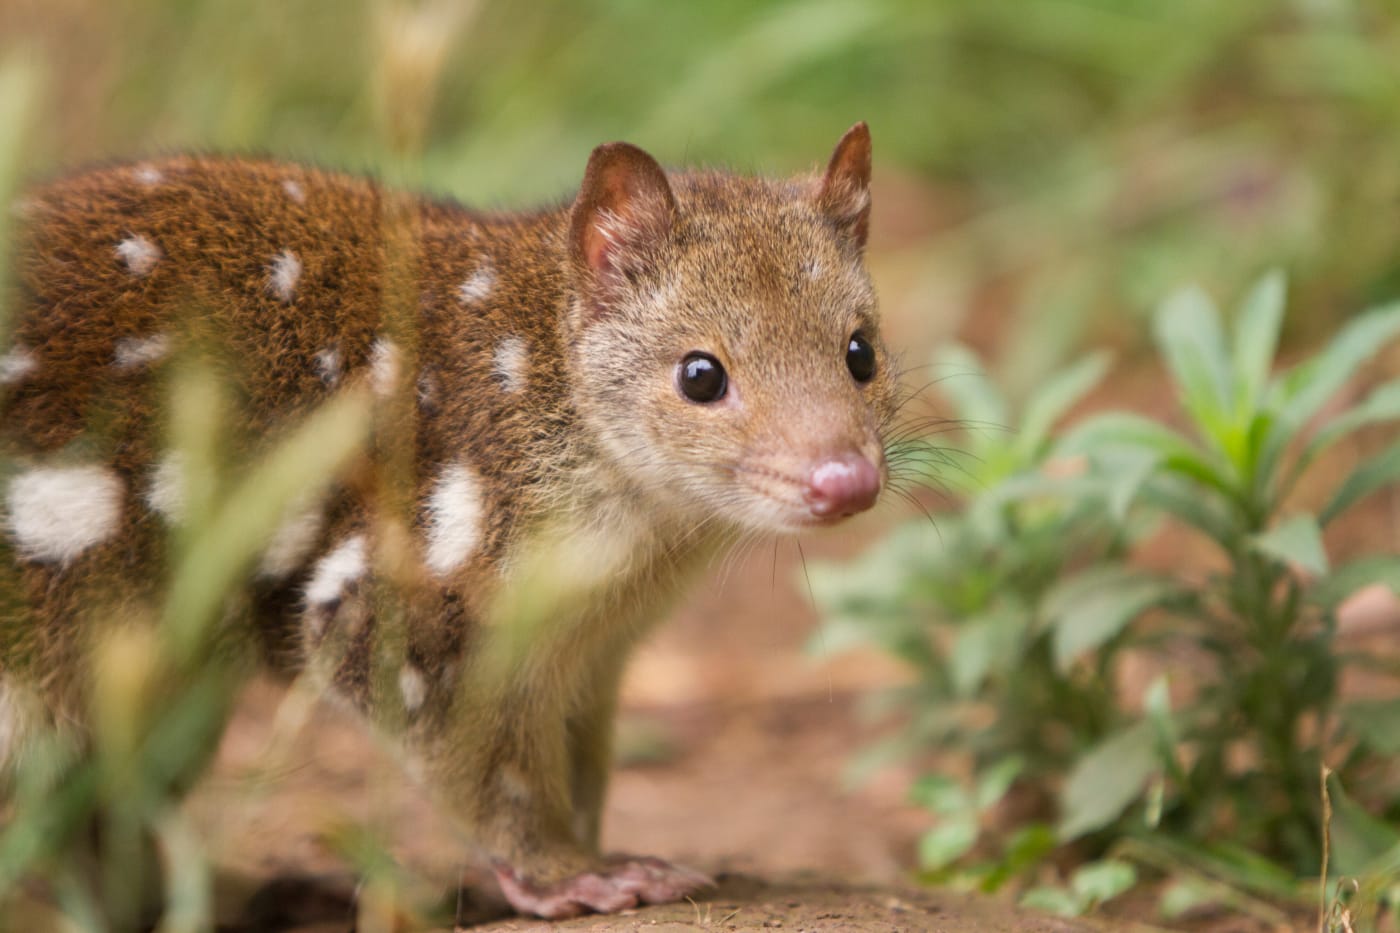 Spotted-tail quoll or tiger quoll